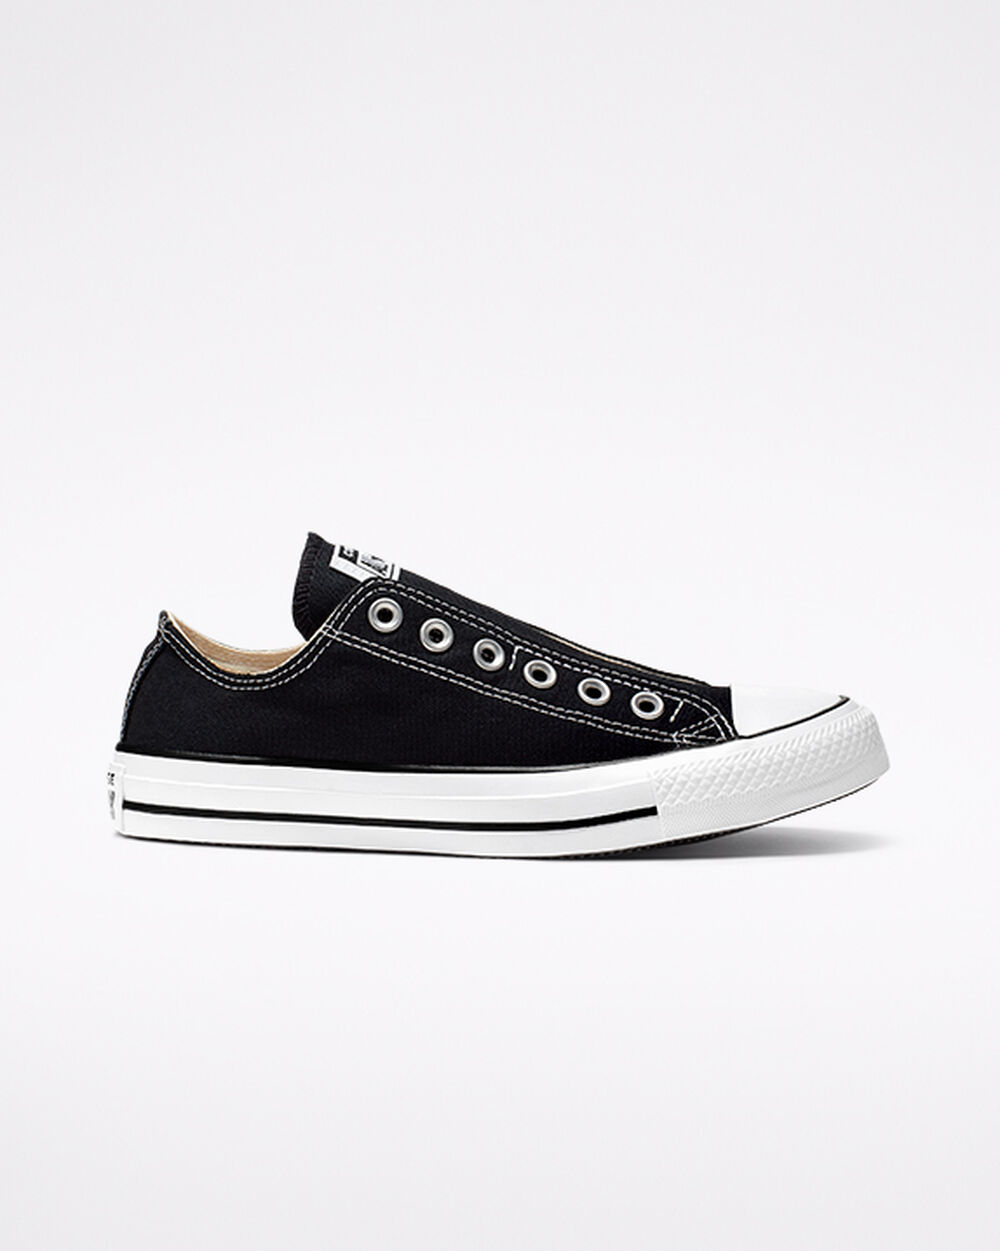 Slip On Converse Chuck Taylor All Star Mujer Negros Blancos Negros | Mexico-581236